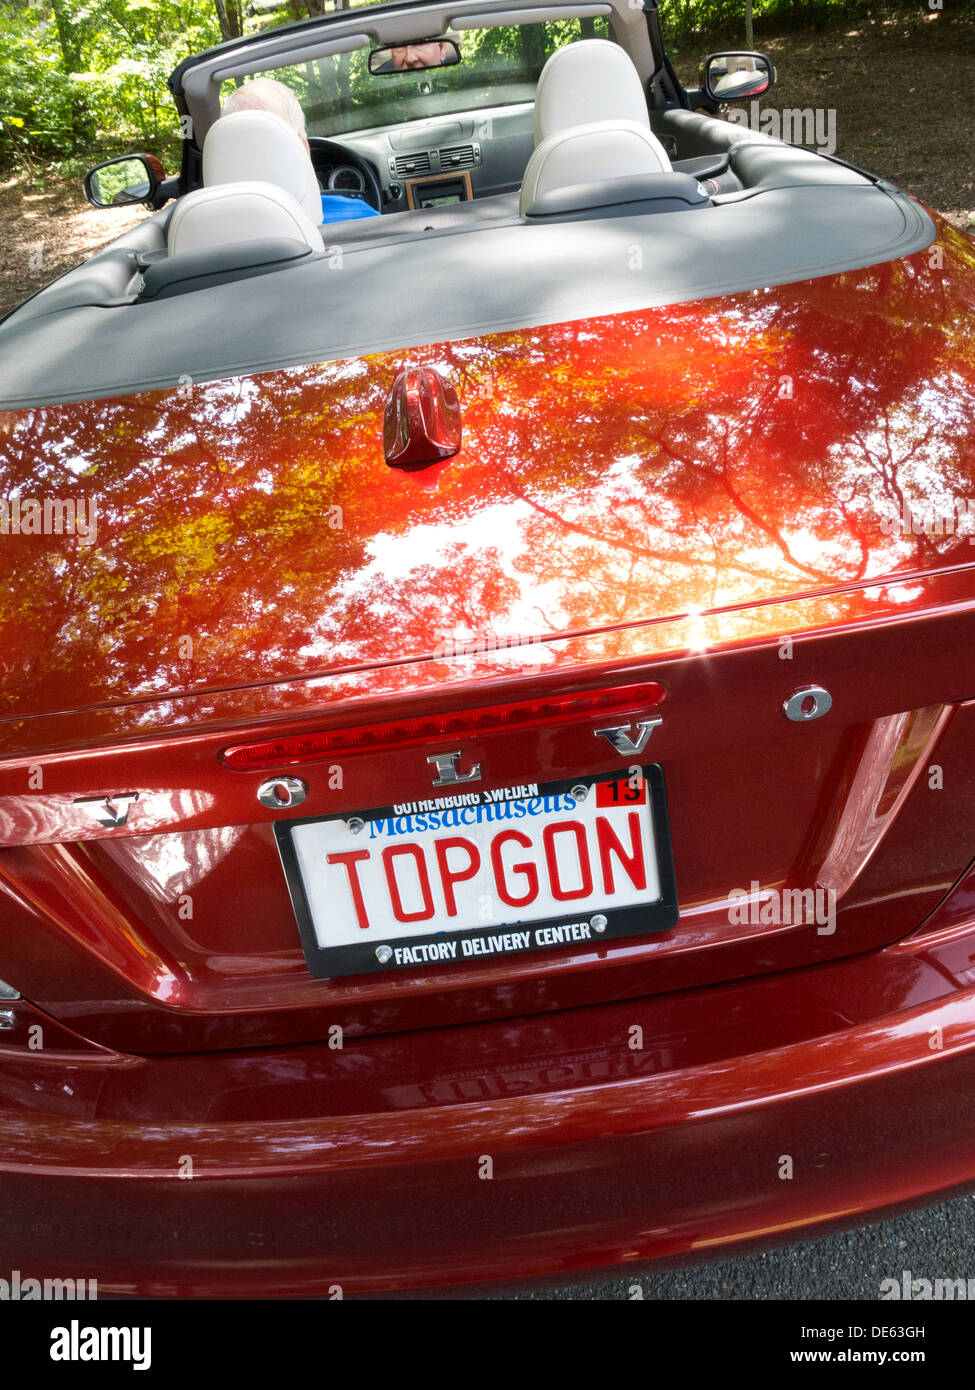 funny personalized license plates